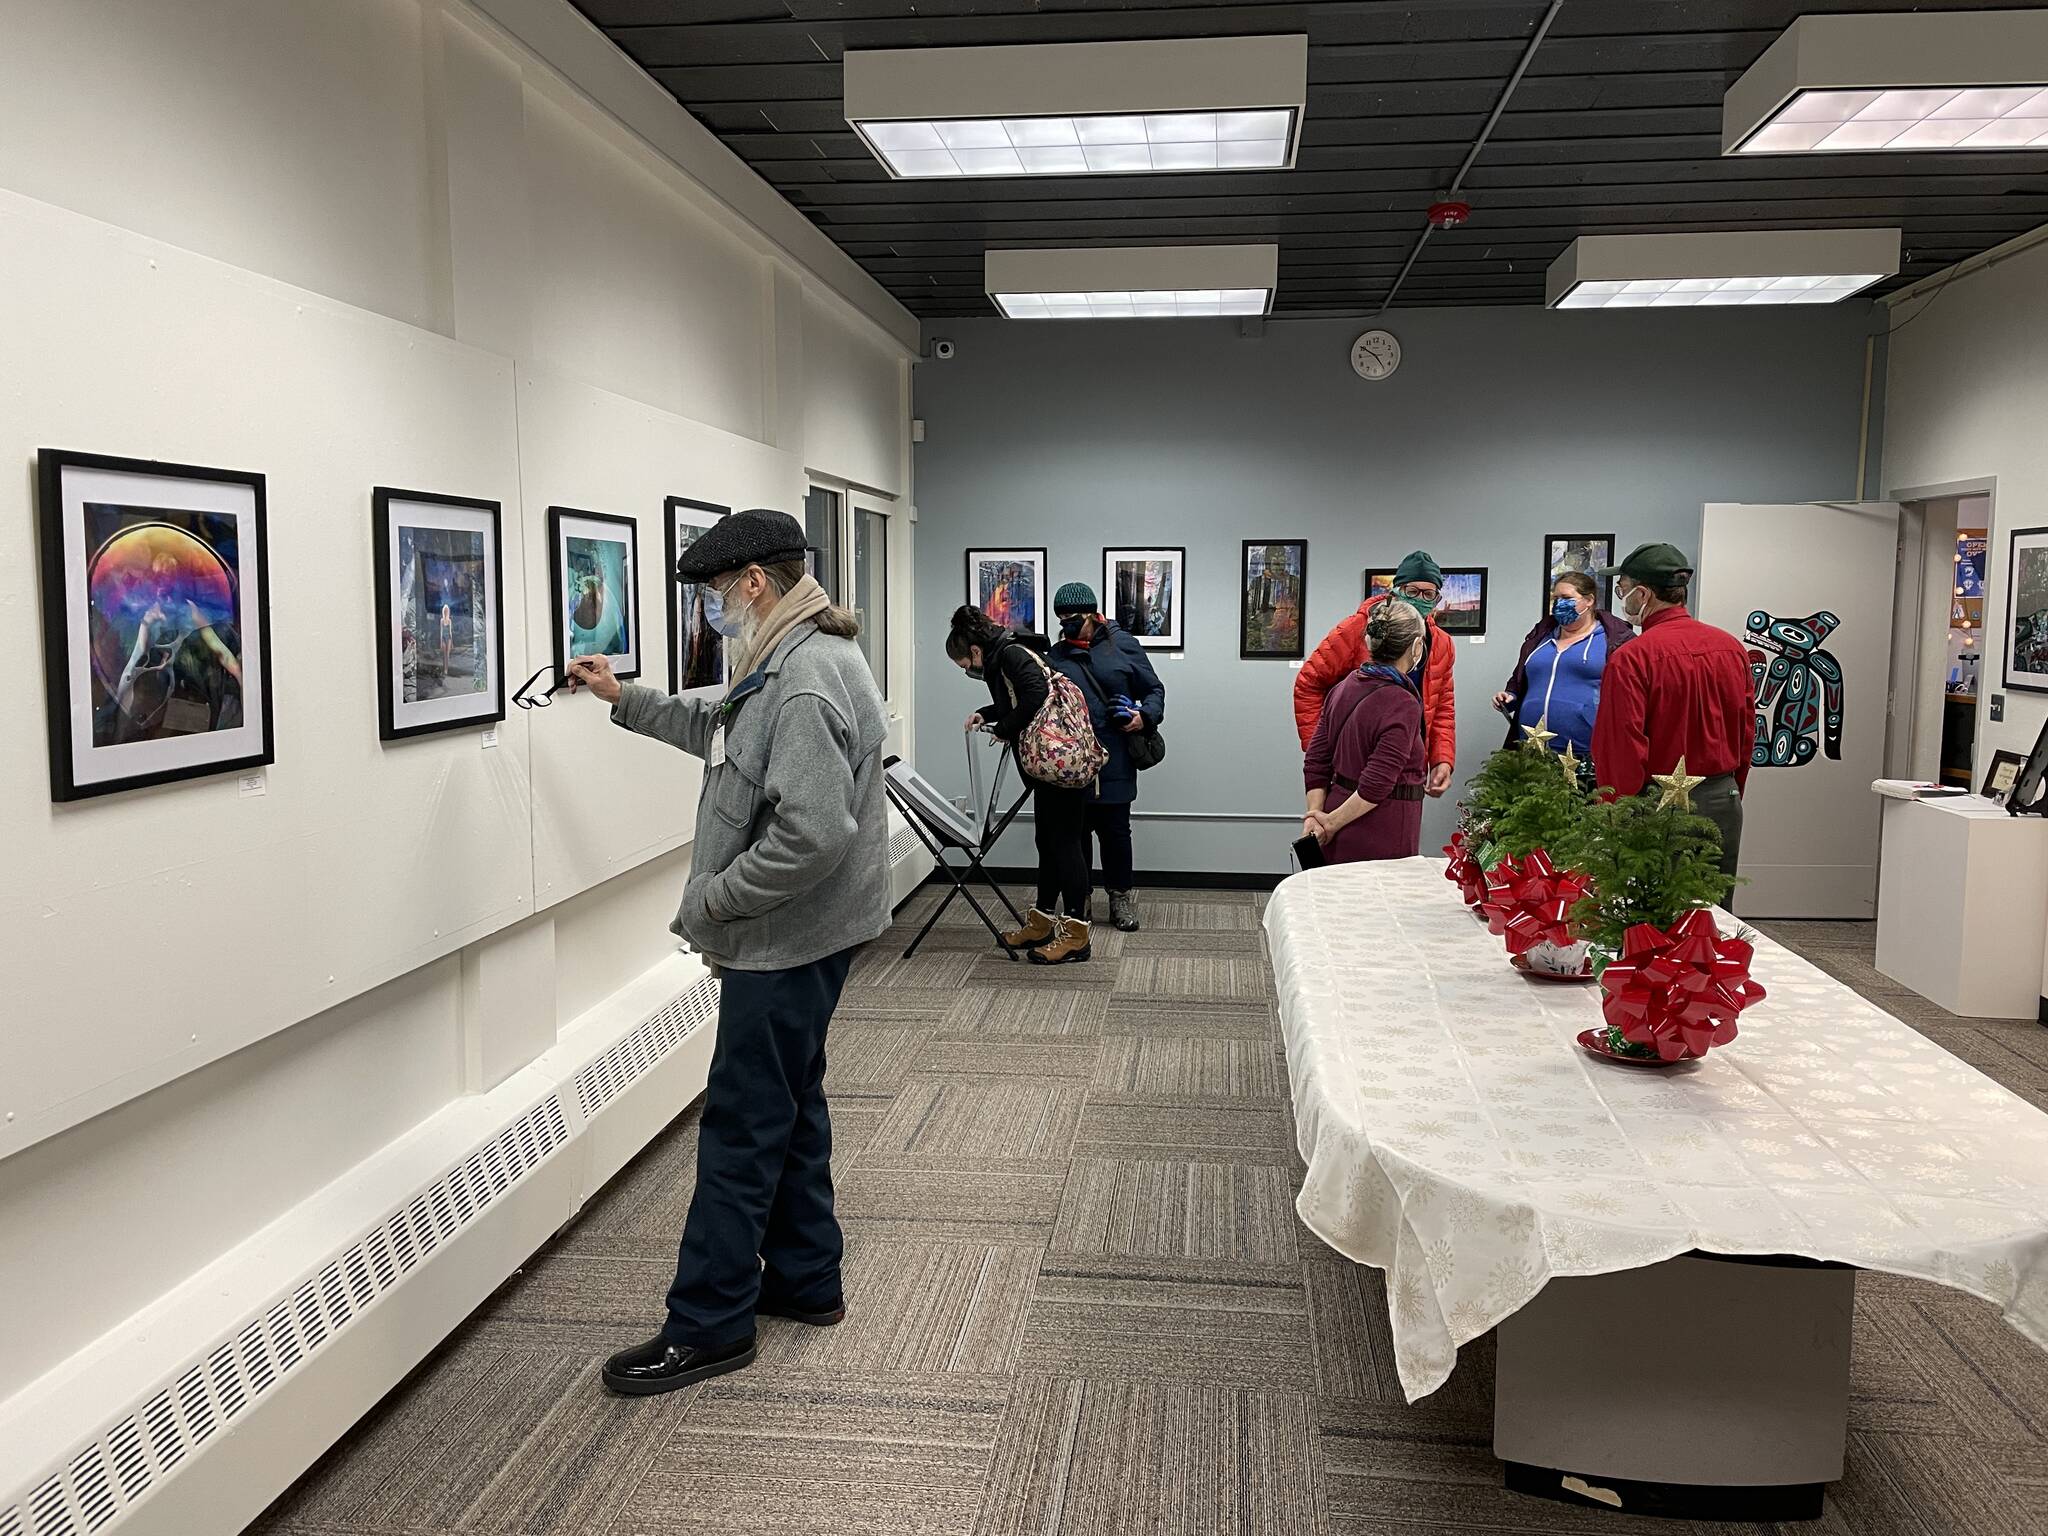 Gallery Walkers peruse the art of Fawn Waterfield at the Juneau Arts and Culture Center on Dec. 3, 2021. (Michael S. Lockett / Juneau Empire)